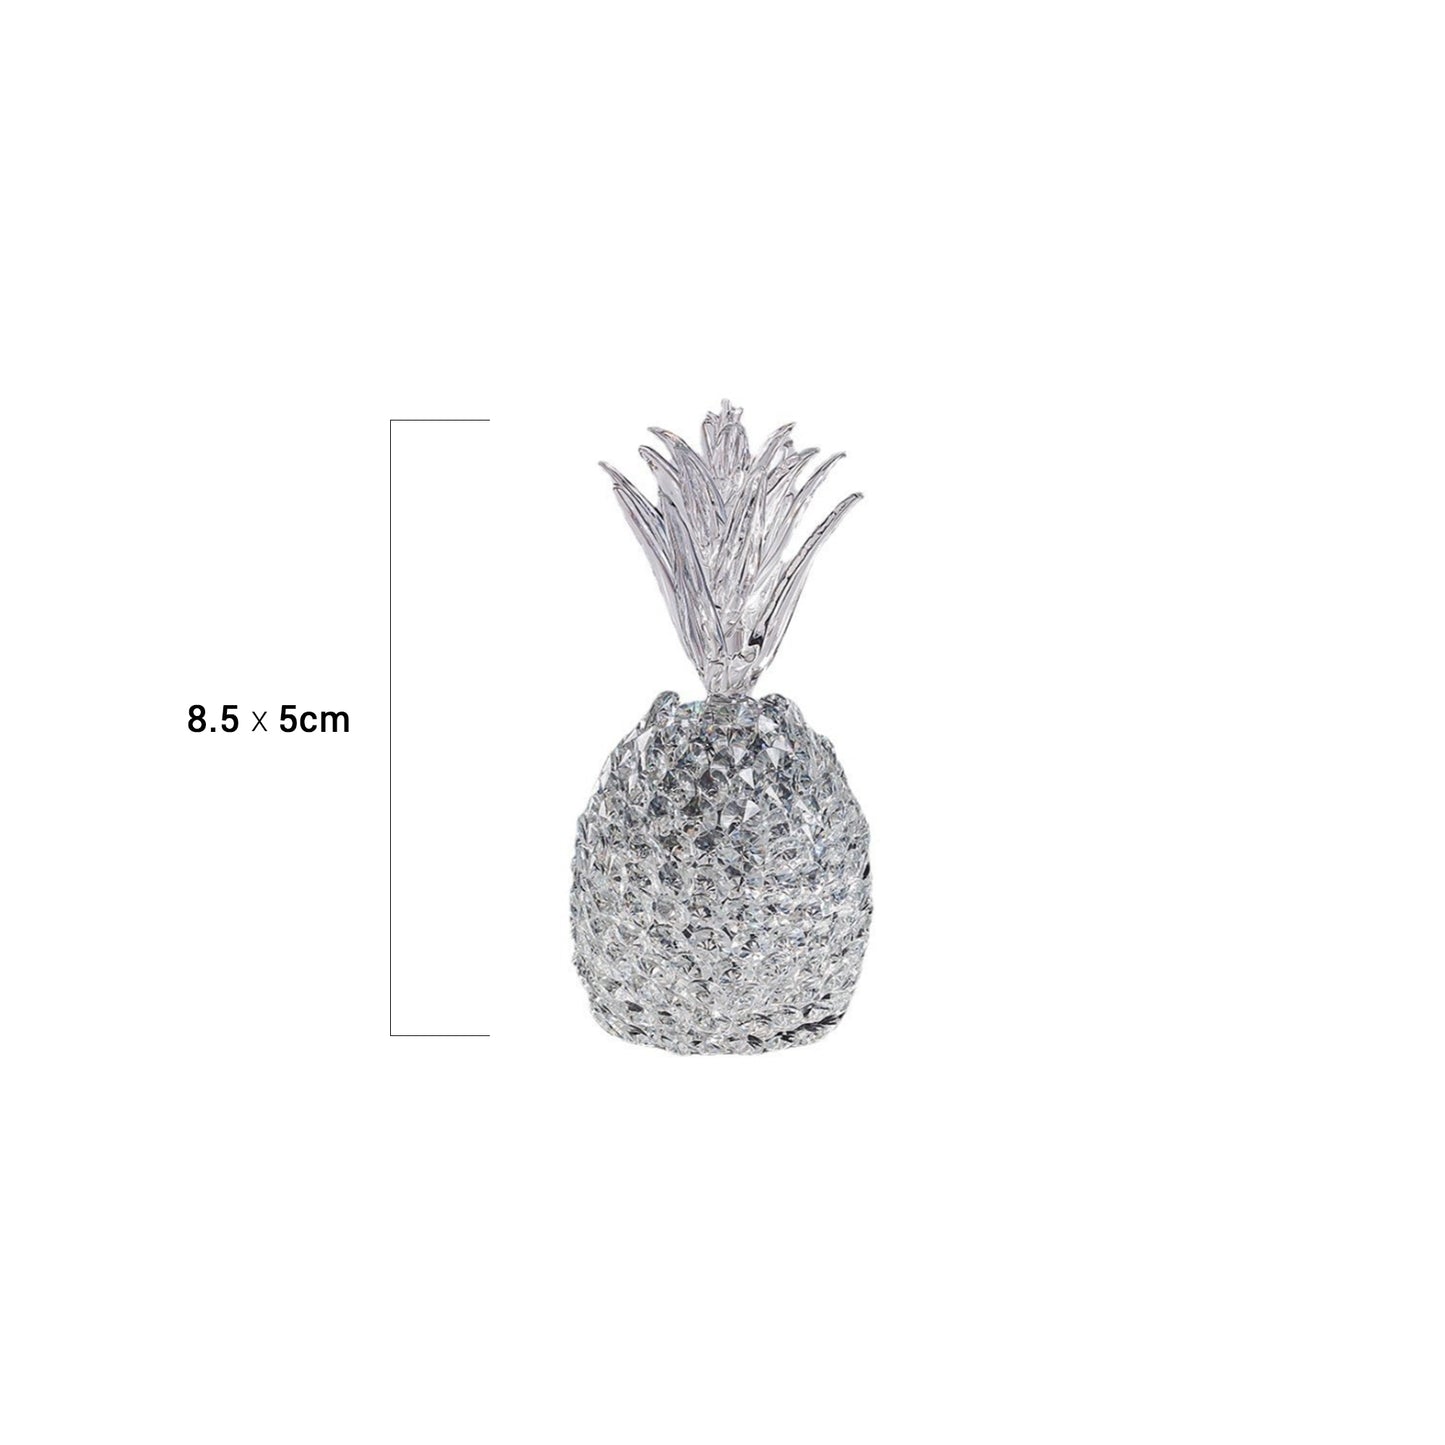 Crystal Hand-Crafted Pineapple Sculpture